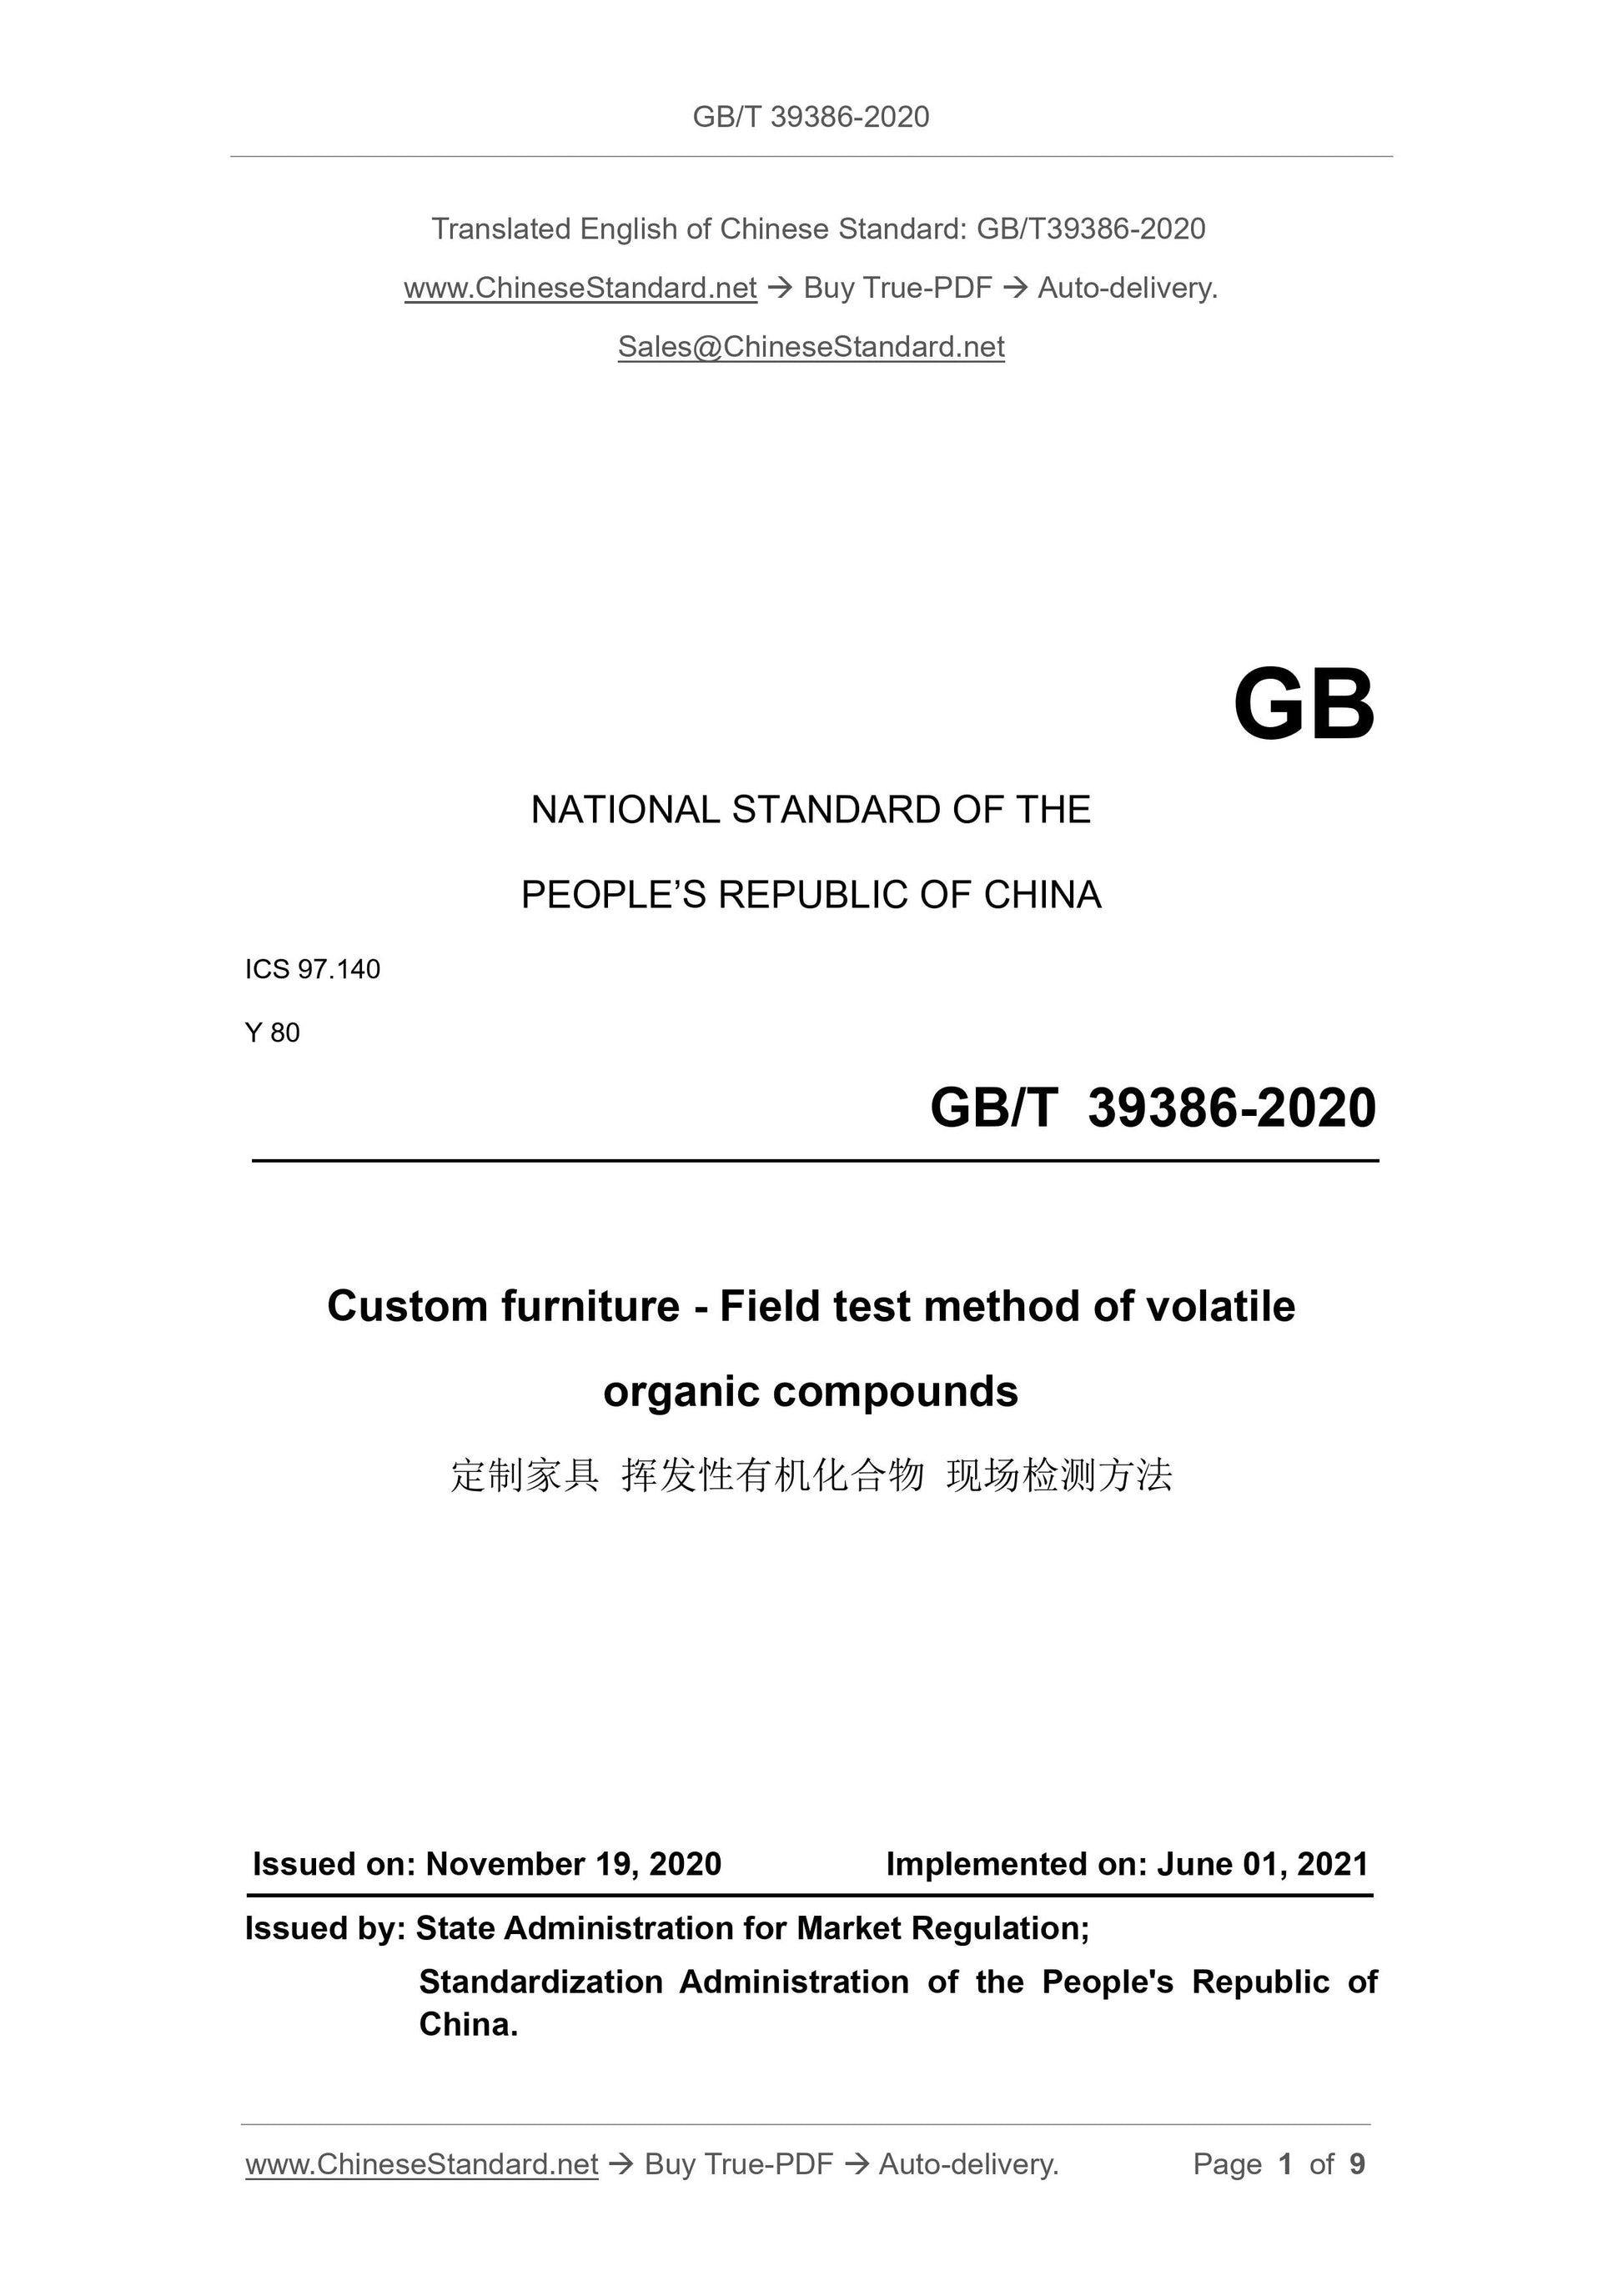 GB/T 39386-2020 Page 1